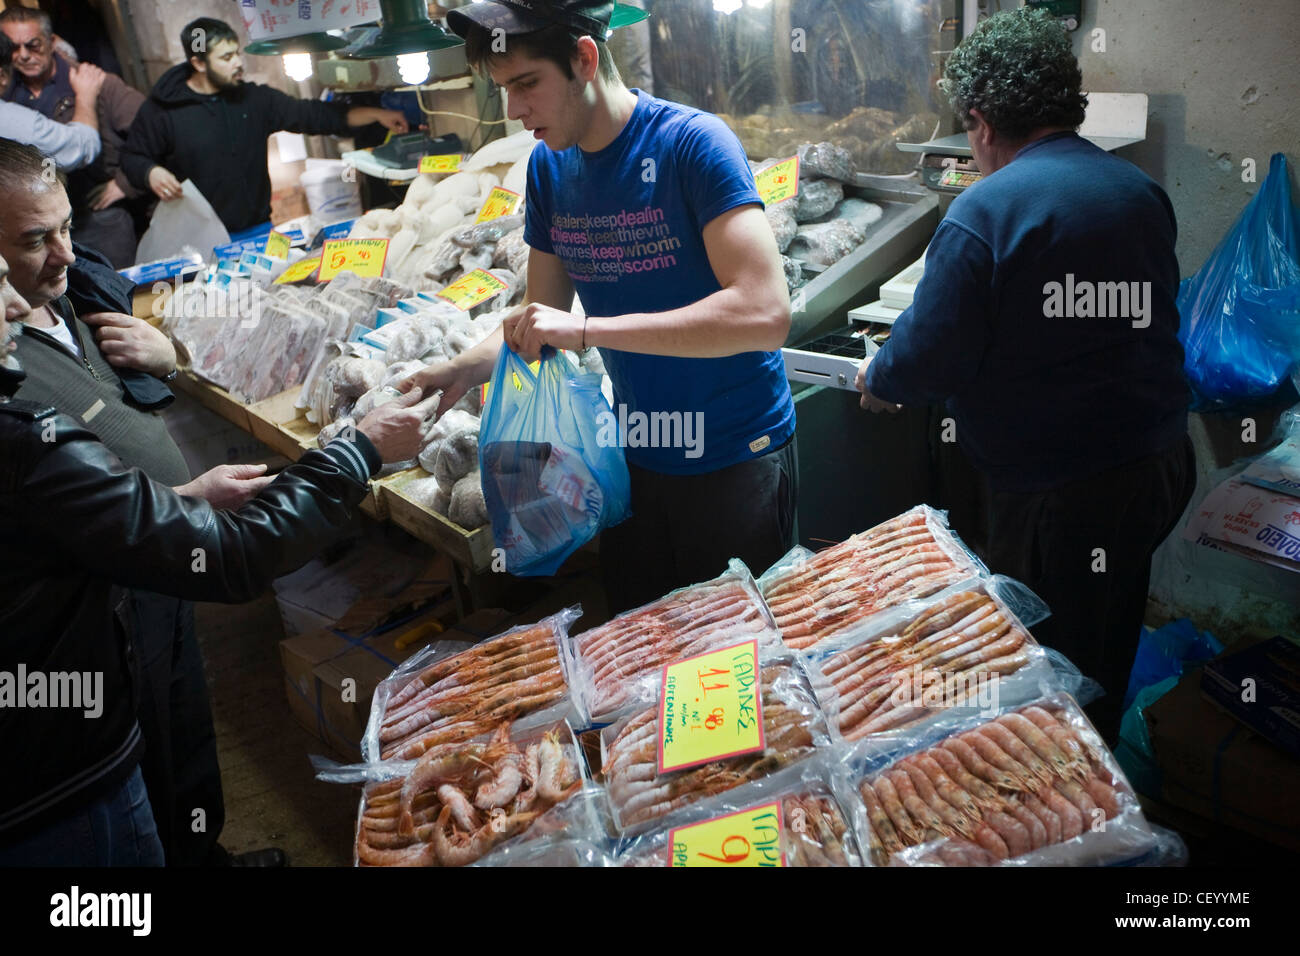 A fishmonger serves a customer at his stall in the Athens Central Market on Athinas Street. Athens, Greece Stock Photo